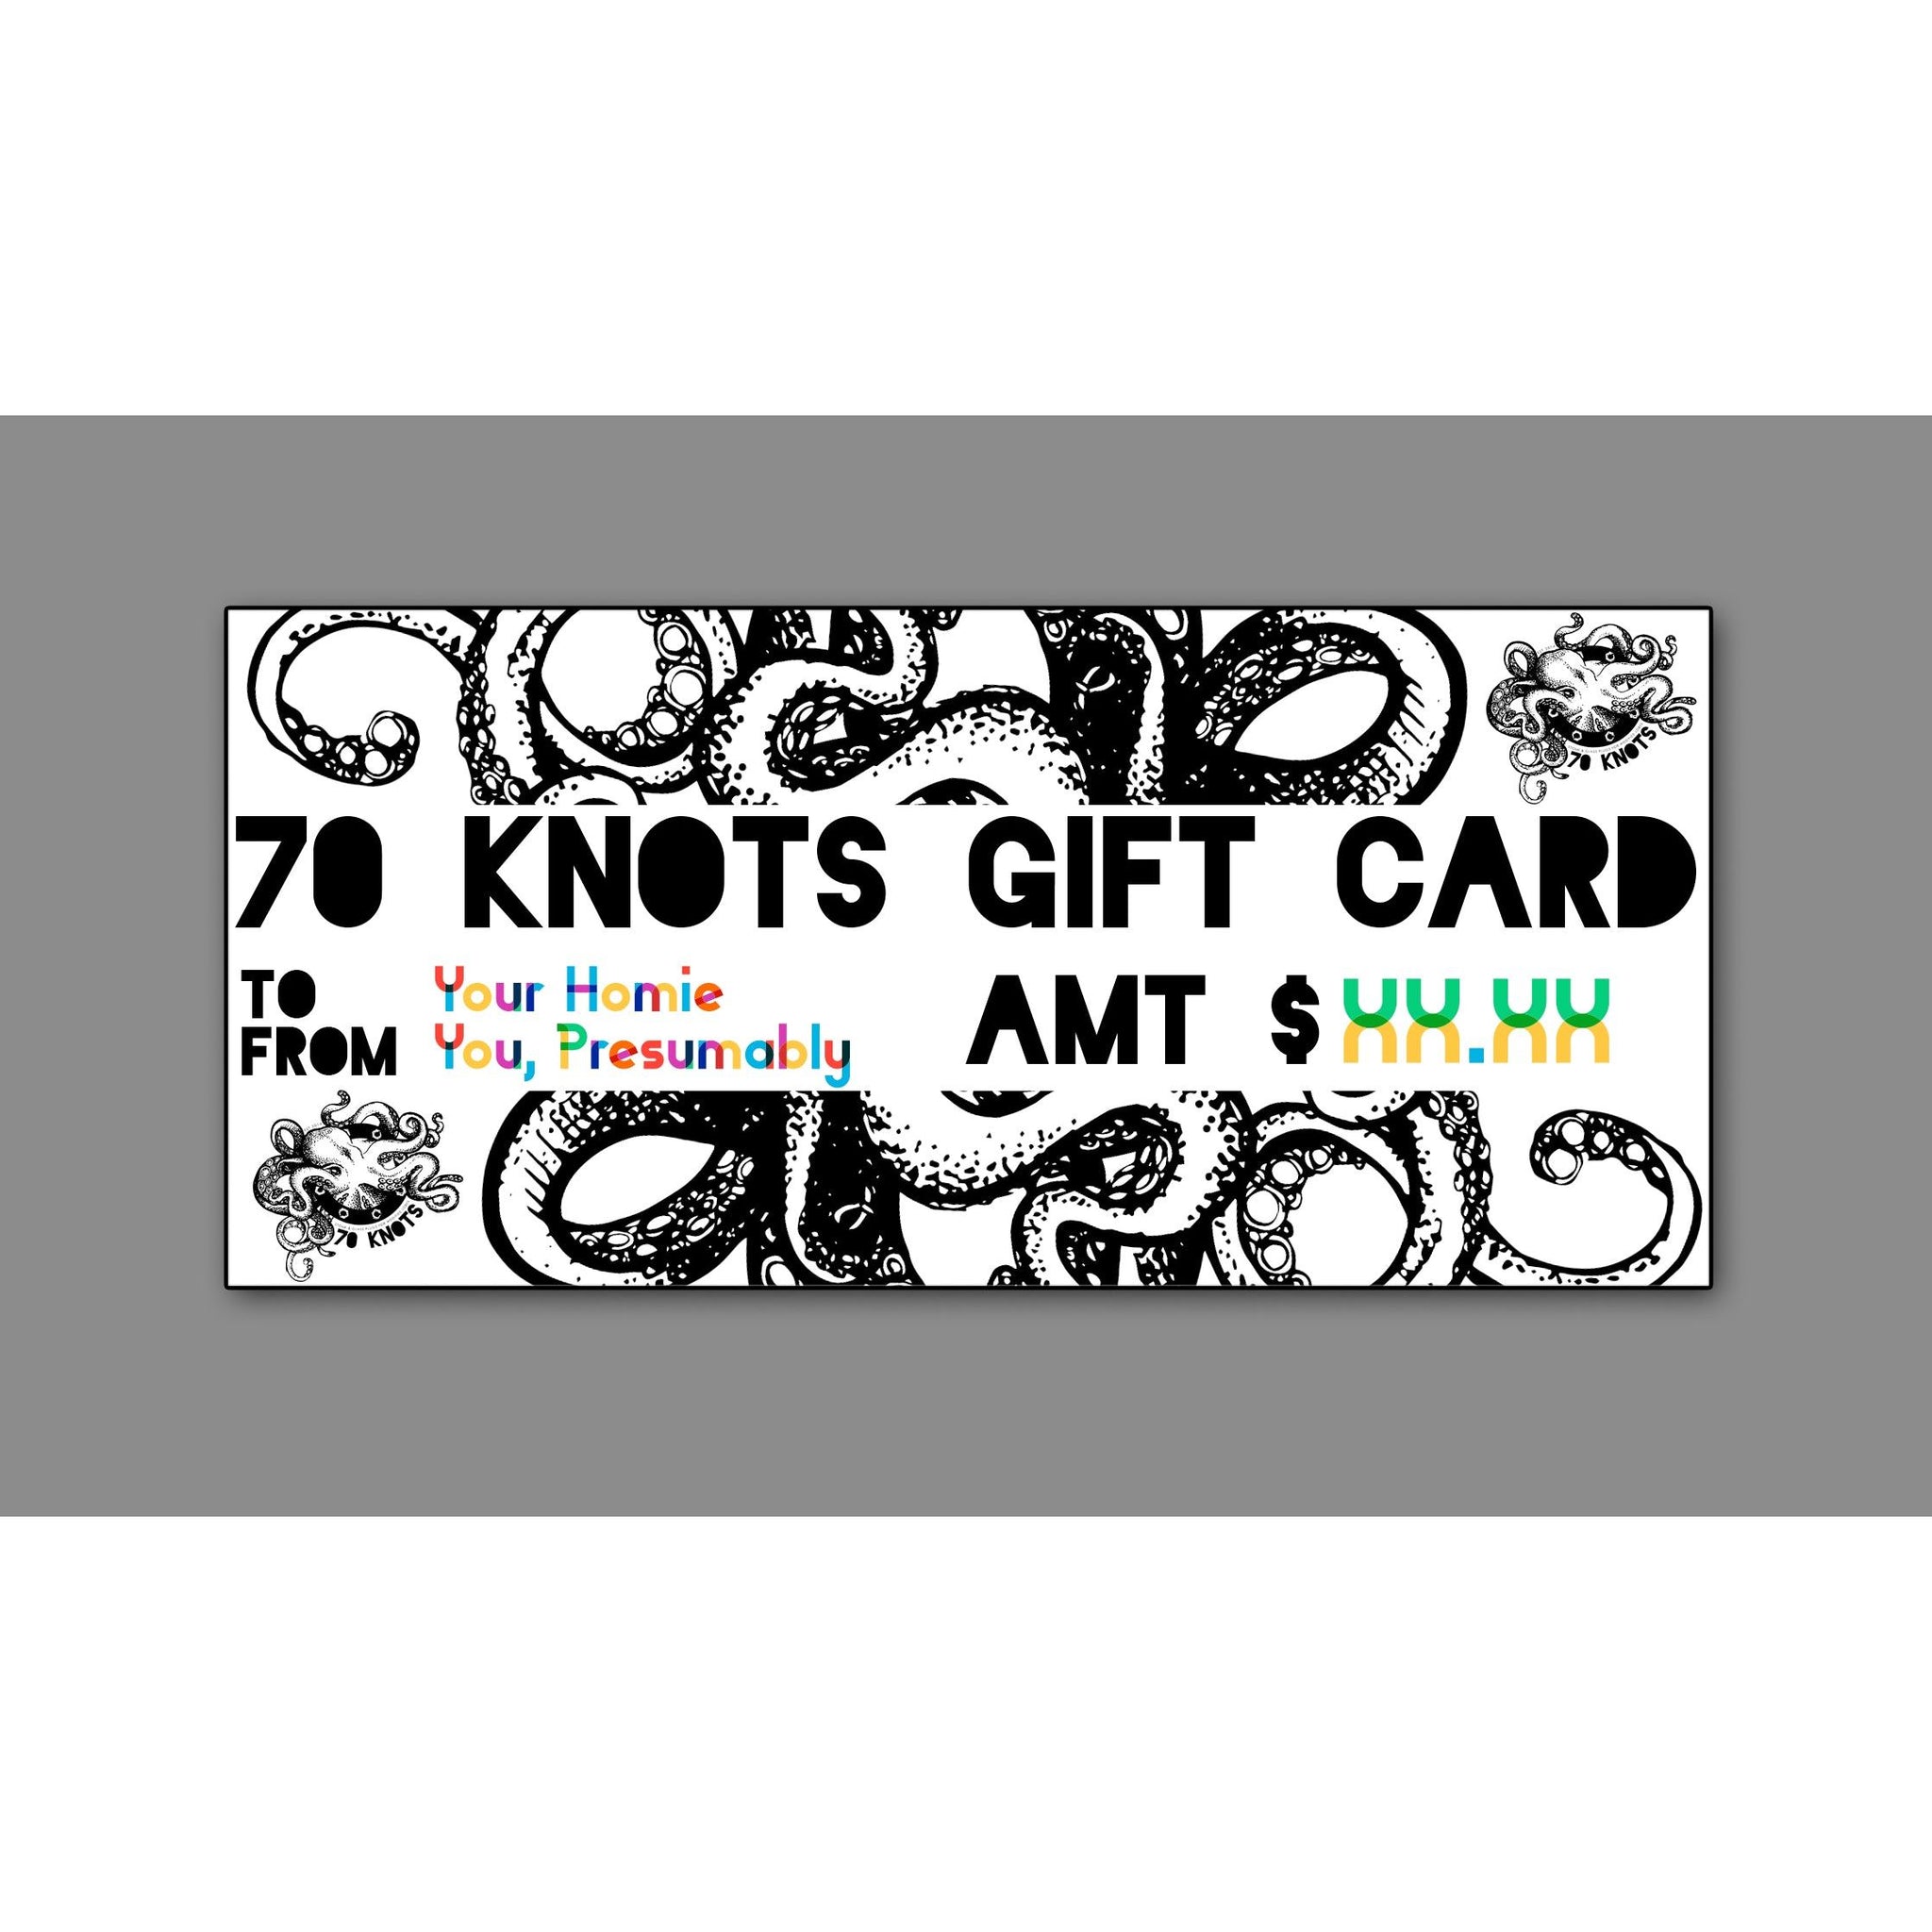 70 Knots Online Gift Cards - 70 Knots